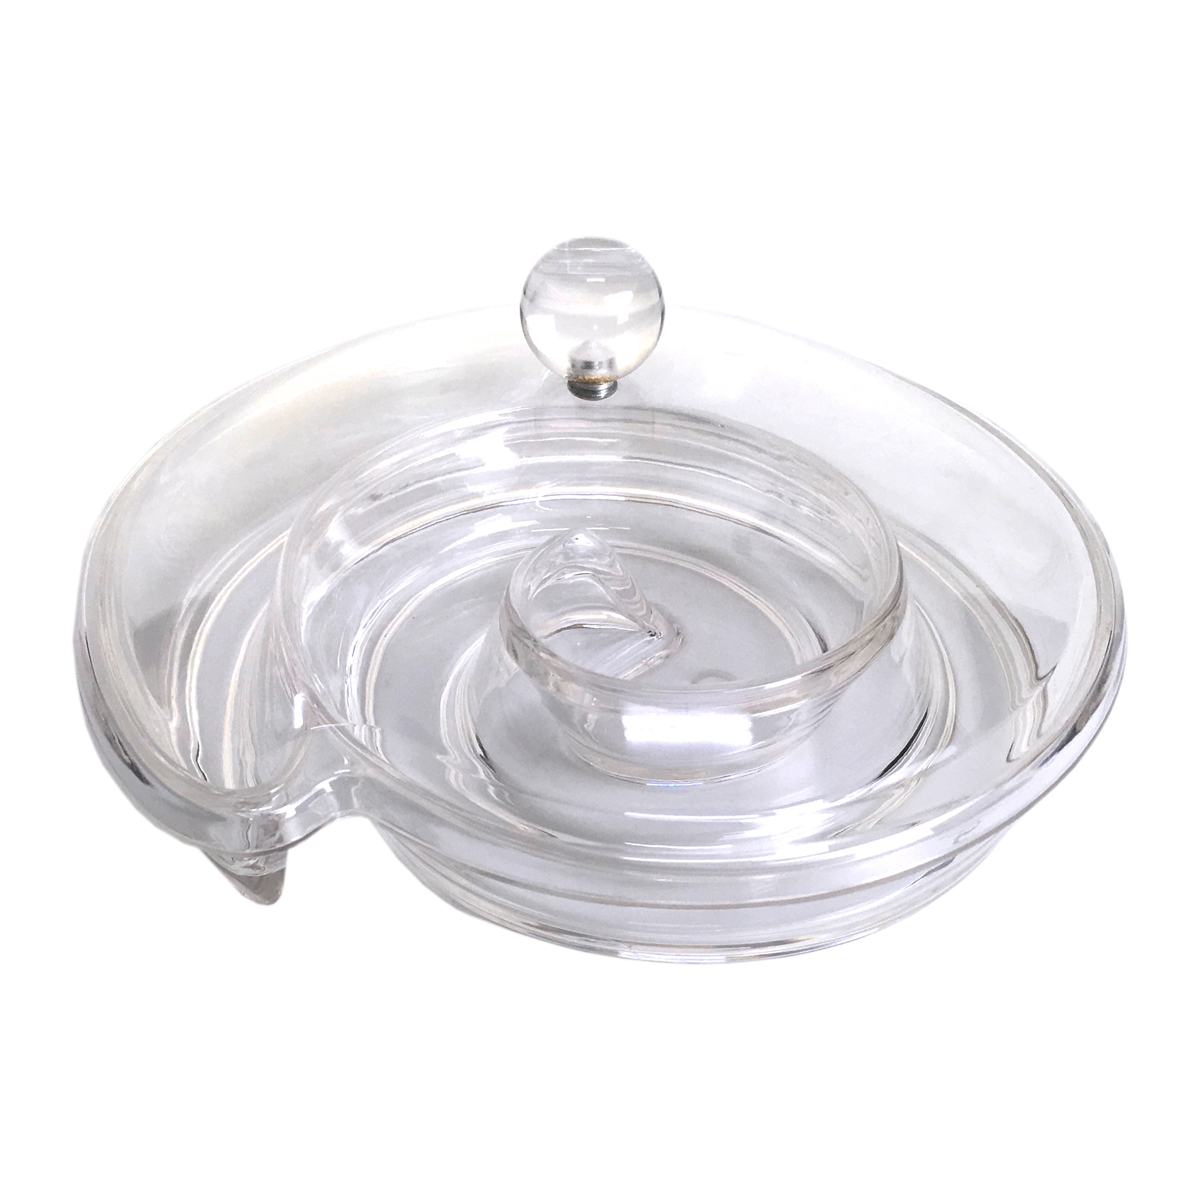 Clear Lucite Spiral Dish Set with Lid